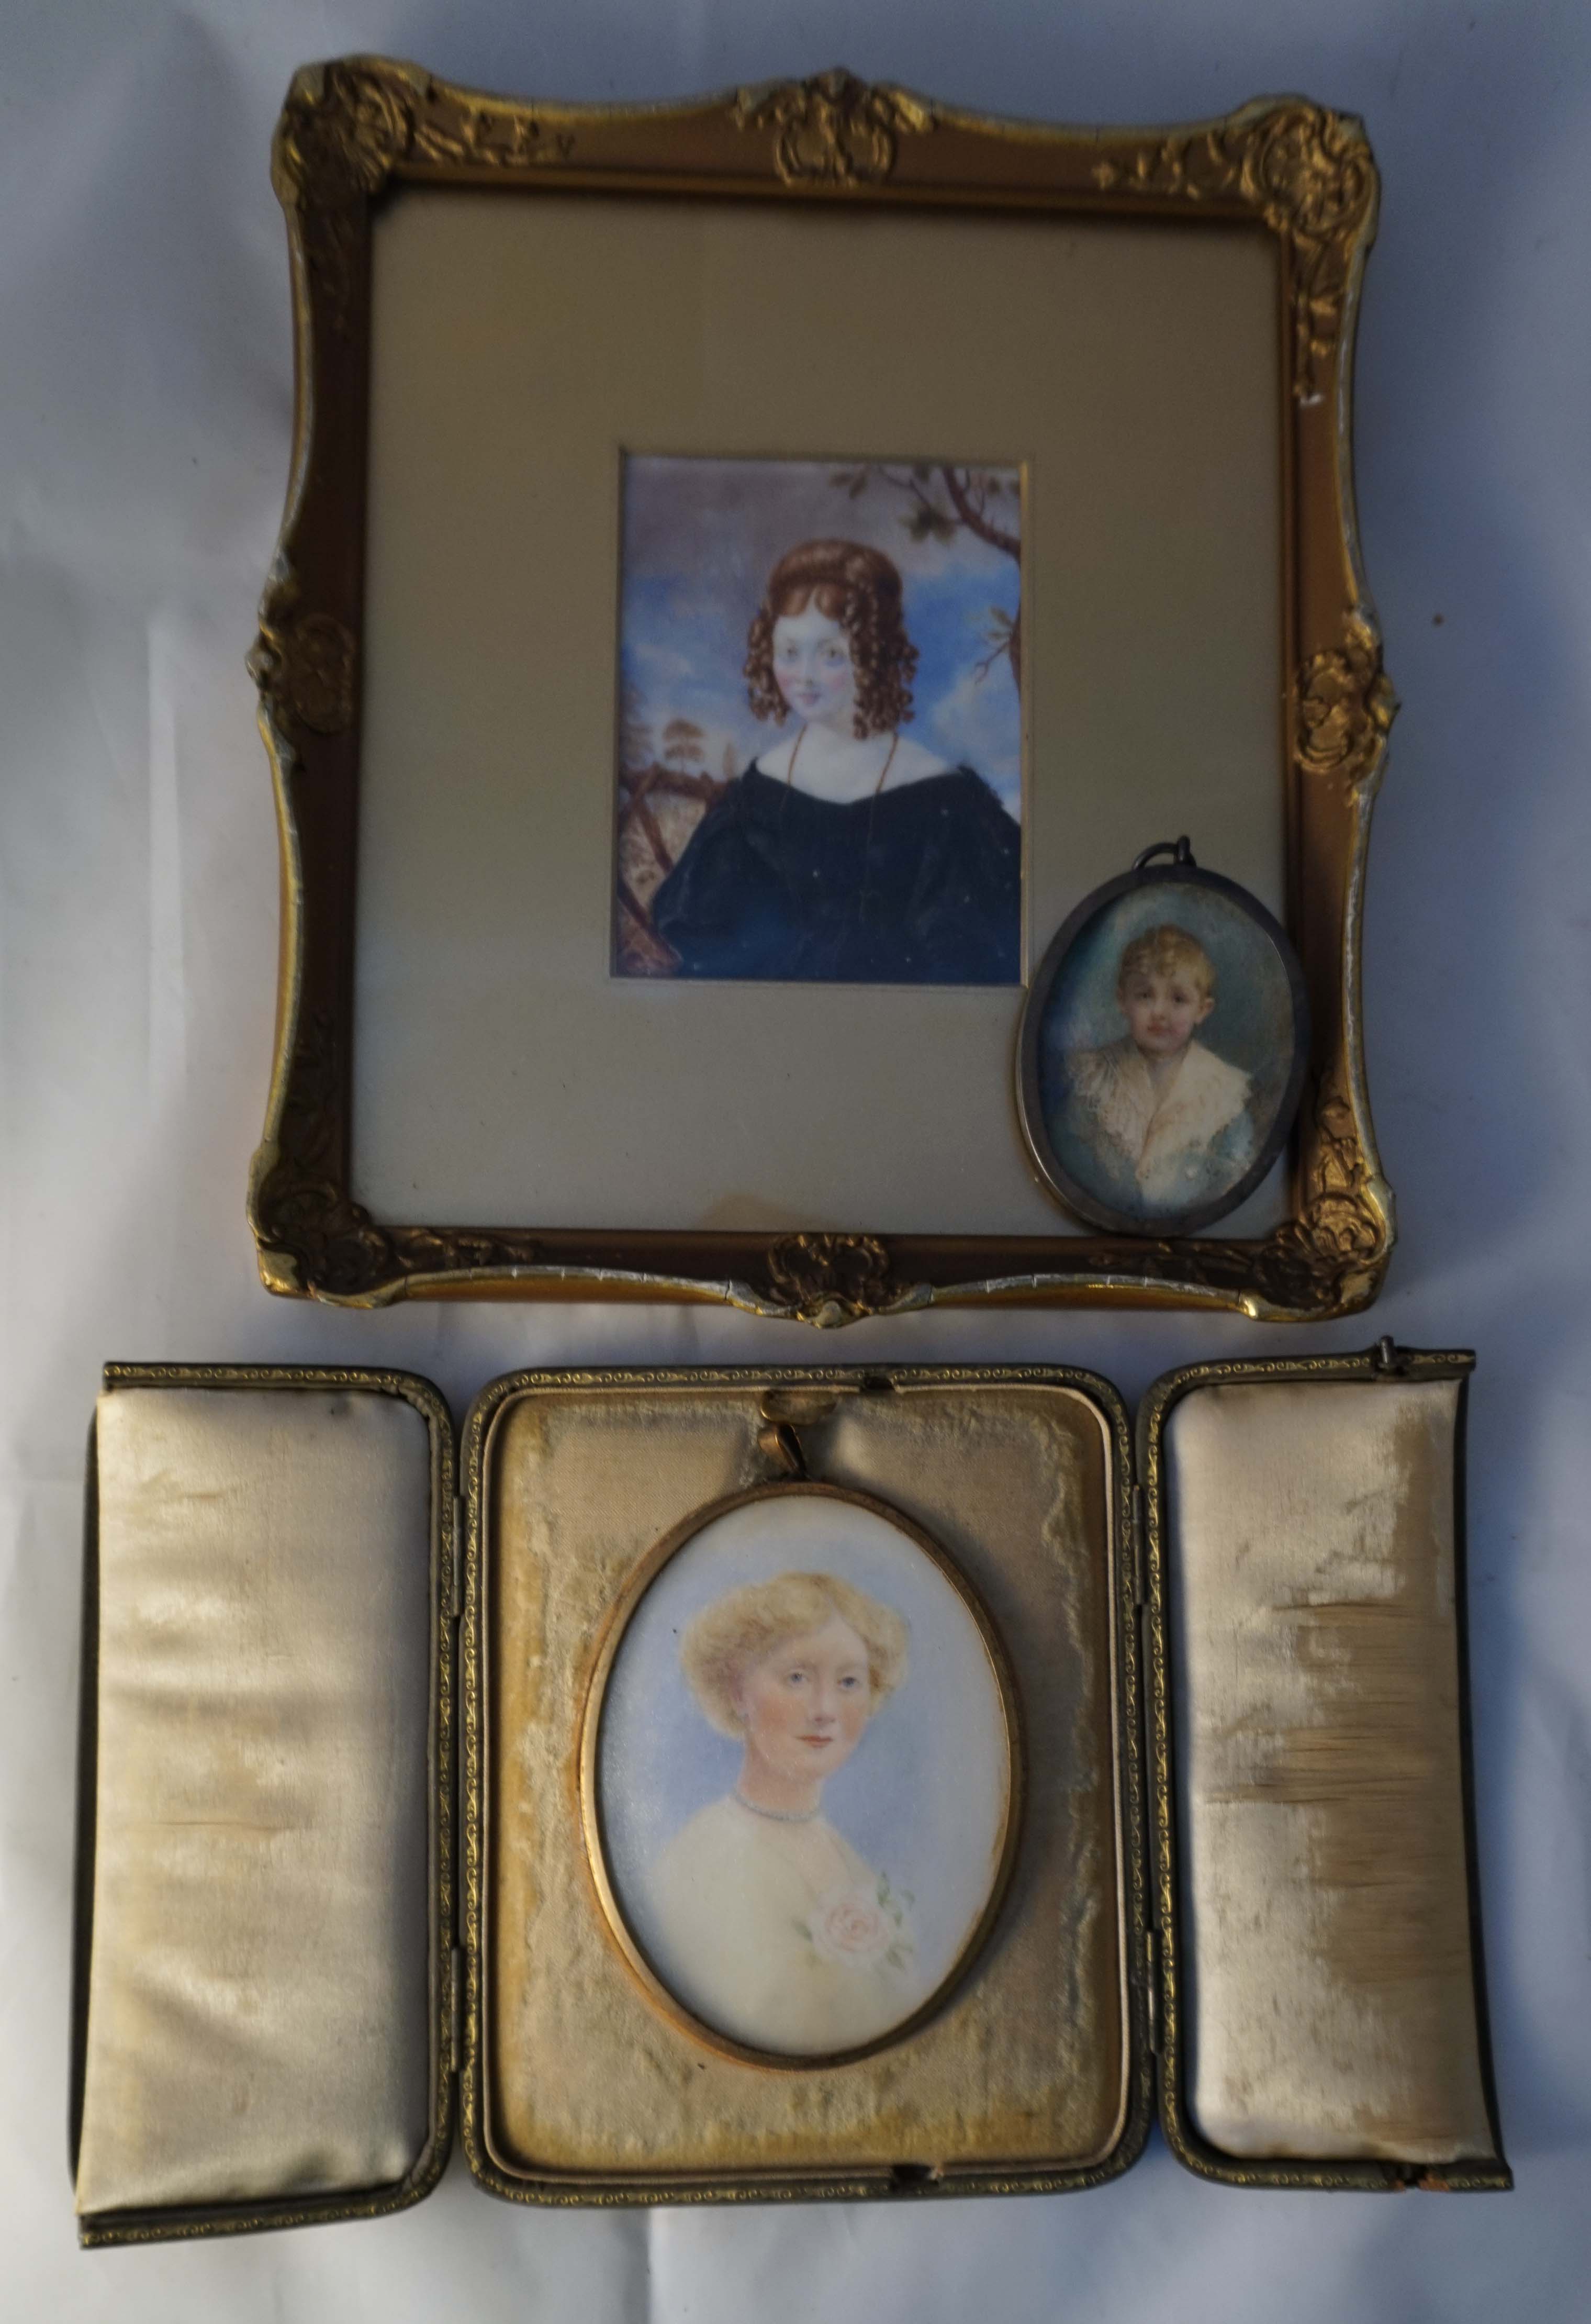 A 19th century portrait miniature of Mrs Wallace, inset in ornate gilt frame, length excluding frame